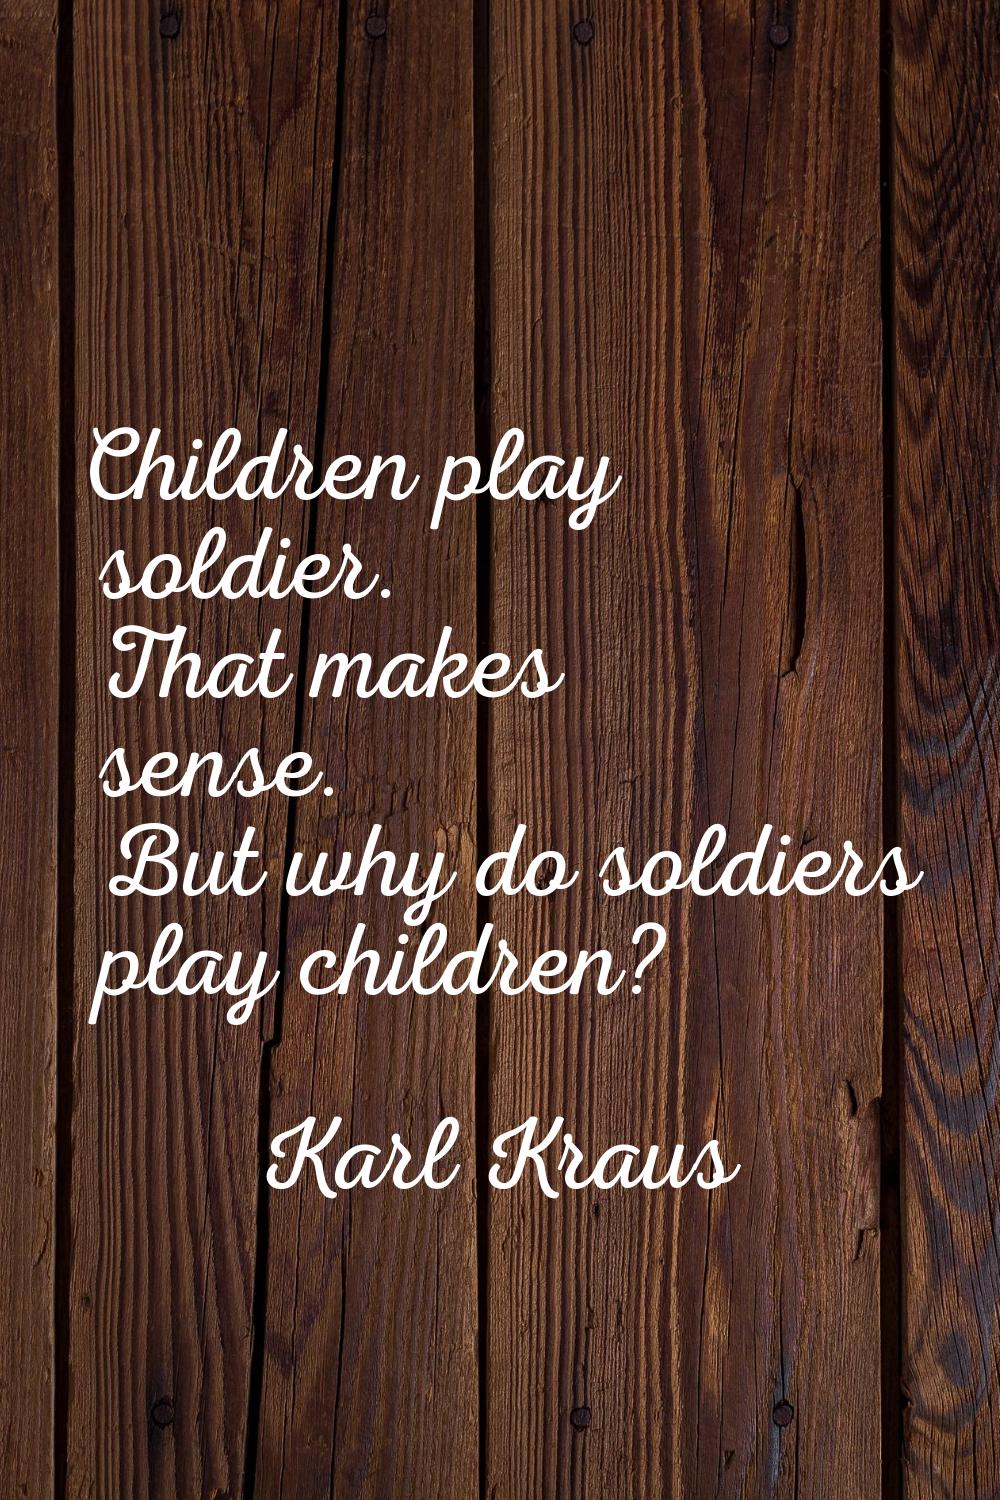 Children play soldier. That makes sense. But why do soldiers play children?